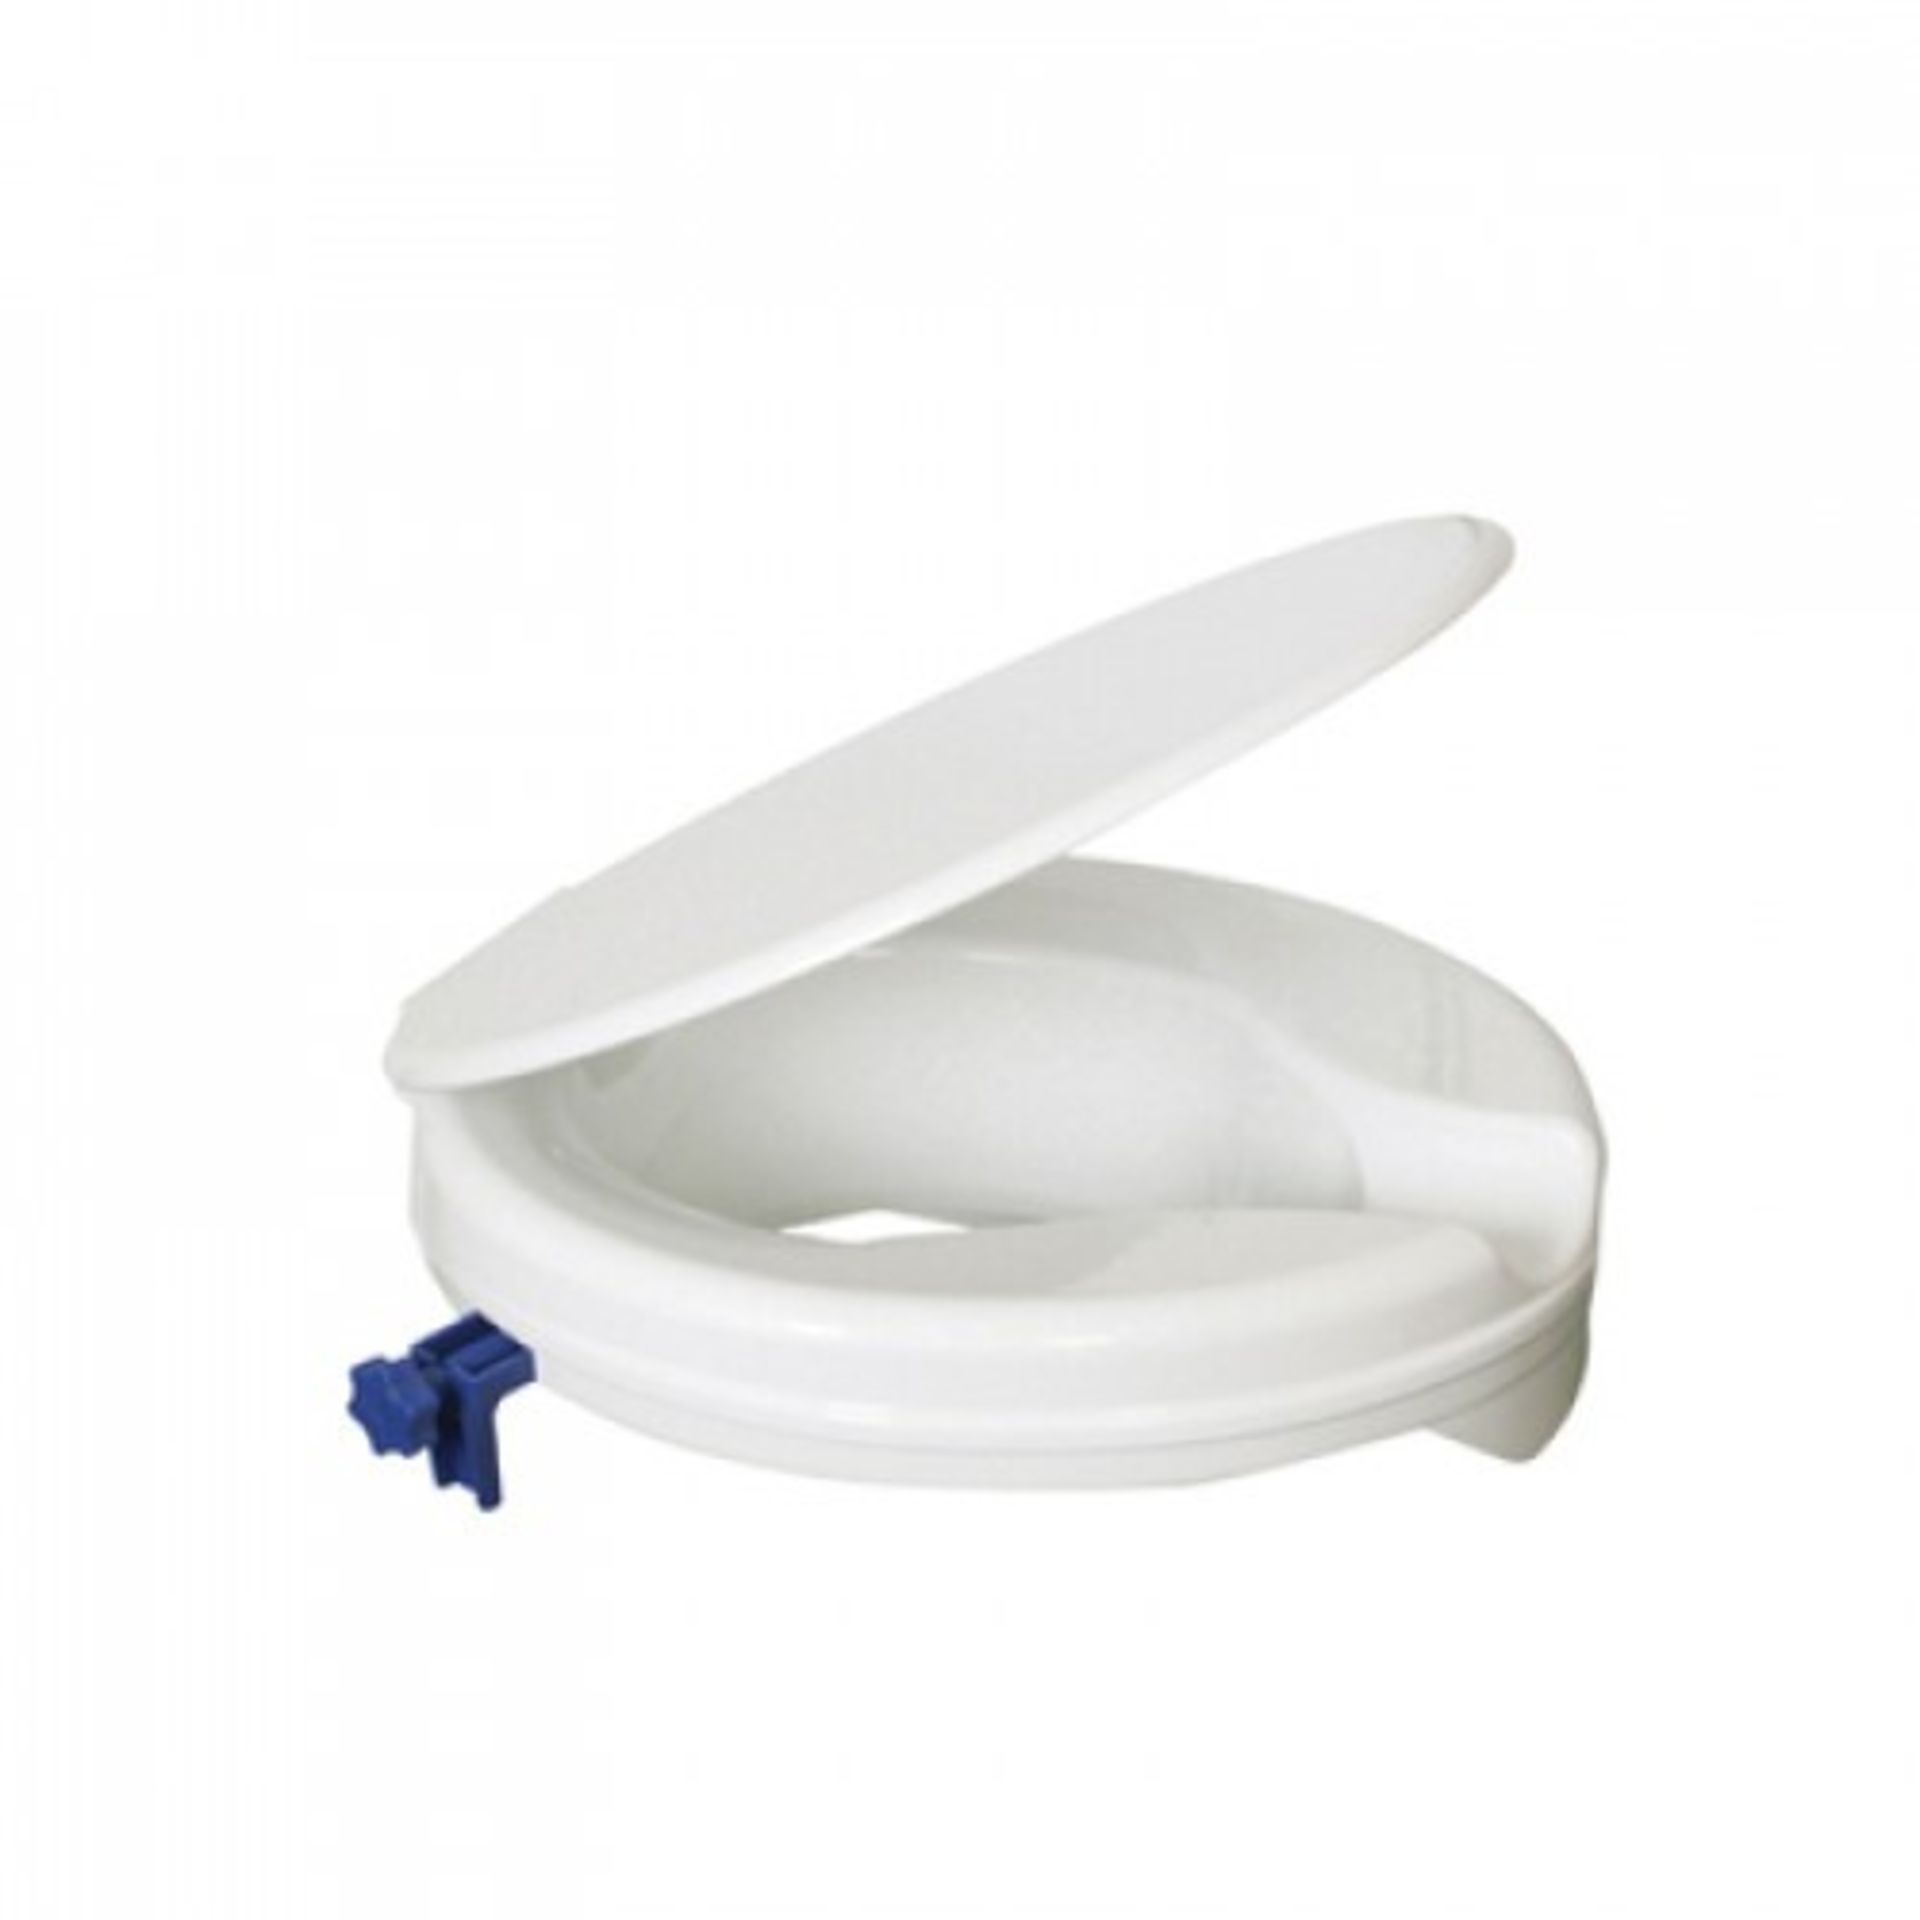 ME : 1 AS NEW BAGGED SENATOR 2" RAISED TOILET SEAT IN WHITE / RRP £22.49 (VIEWING HIGHLY